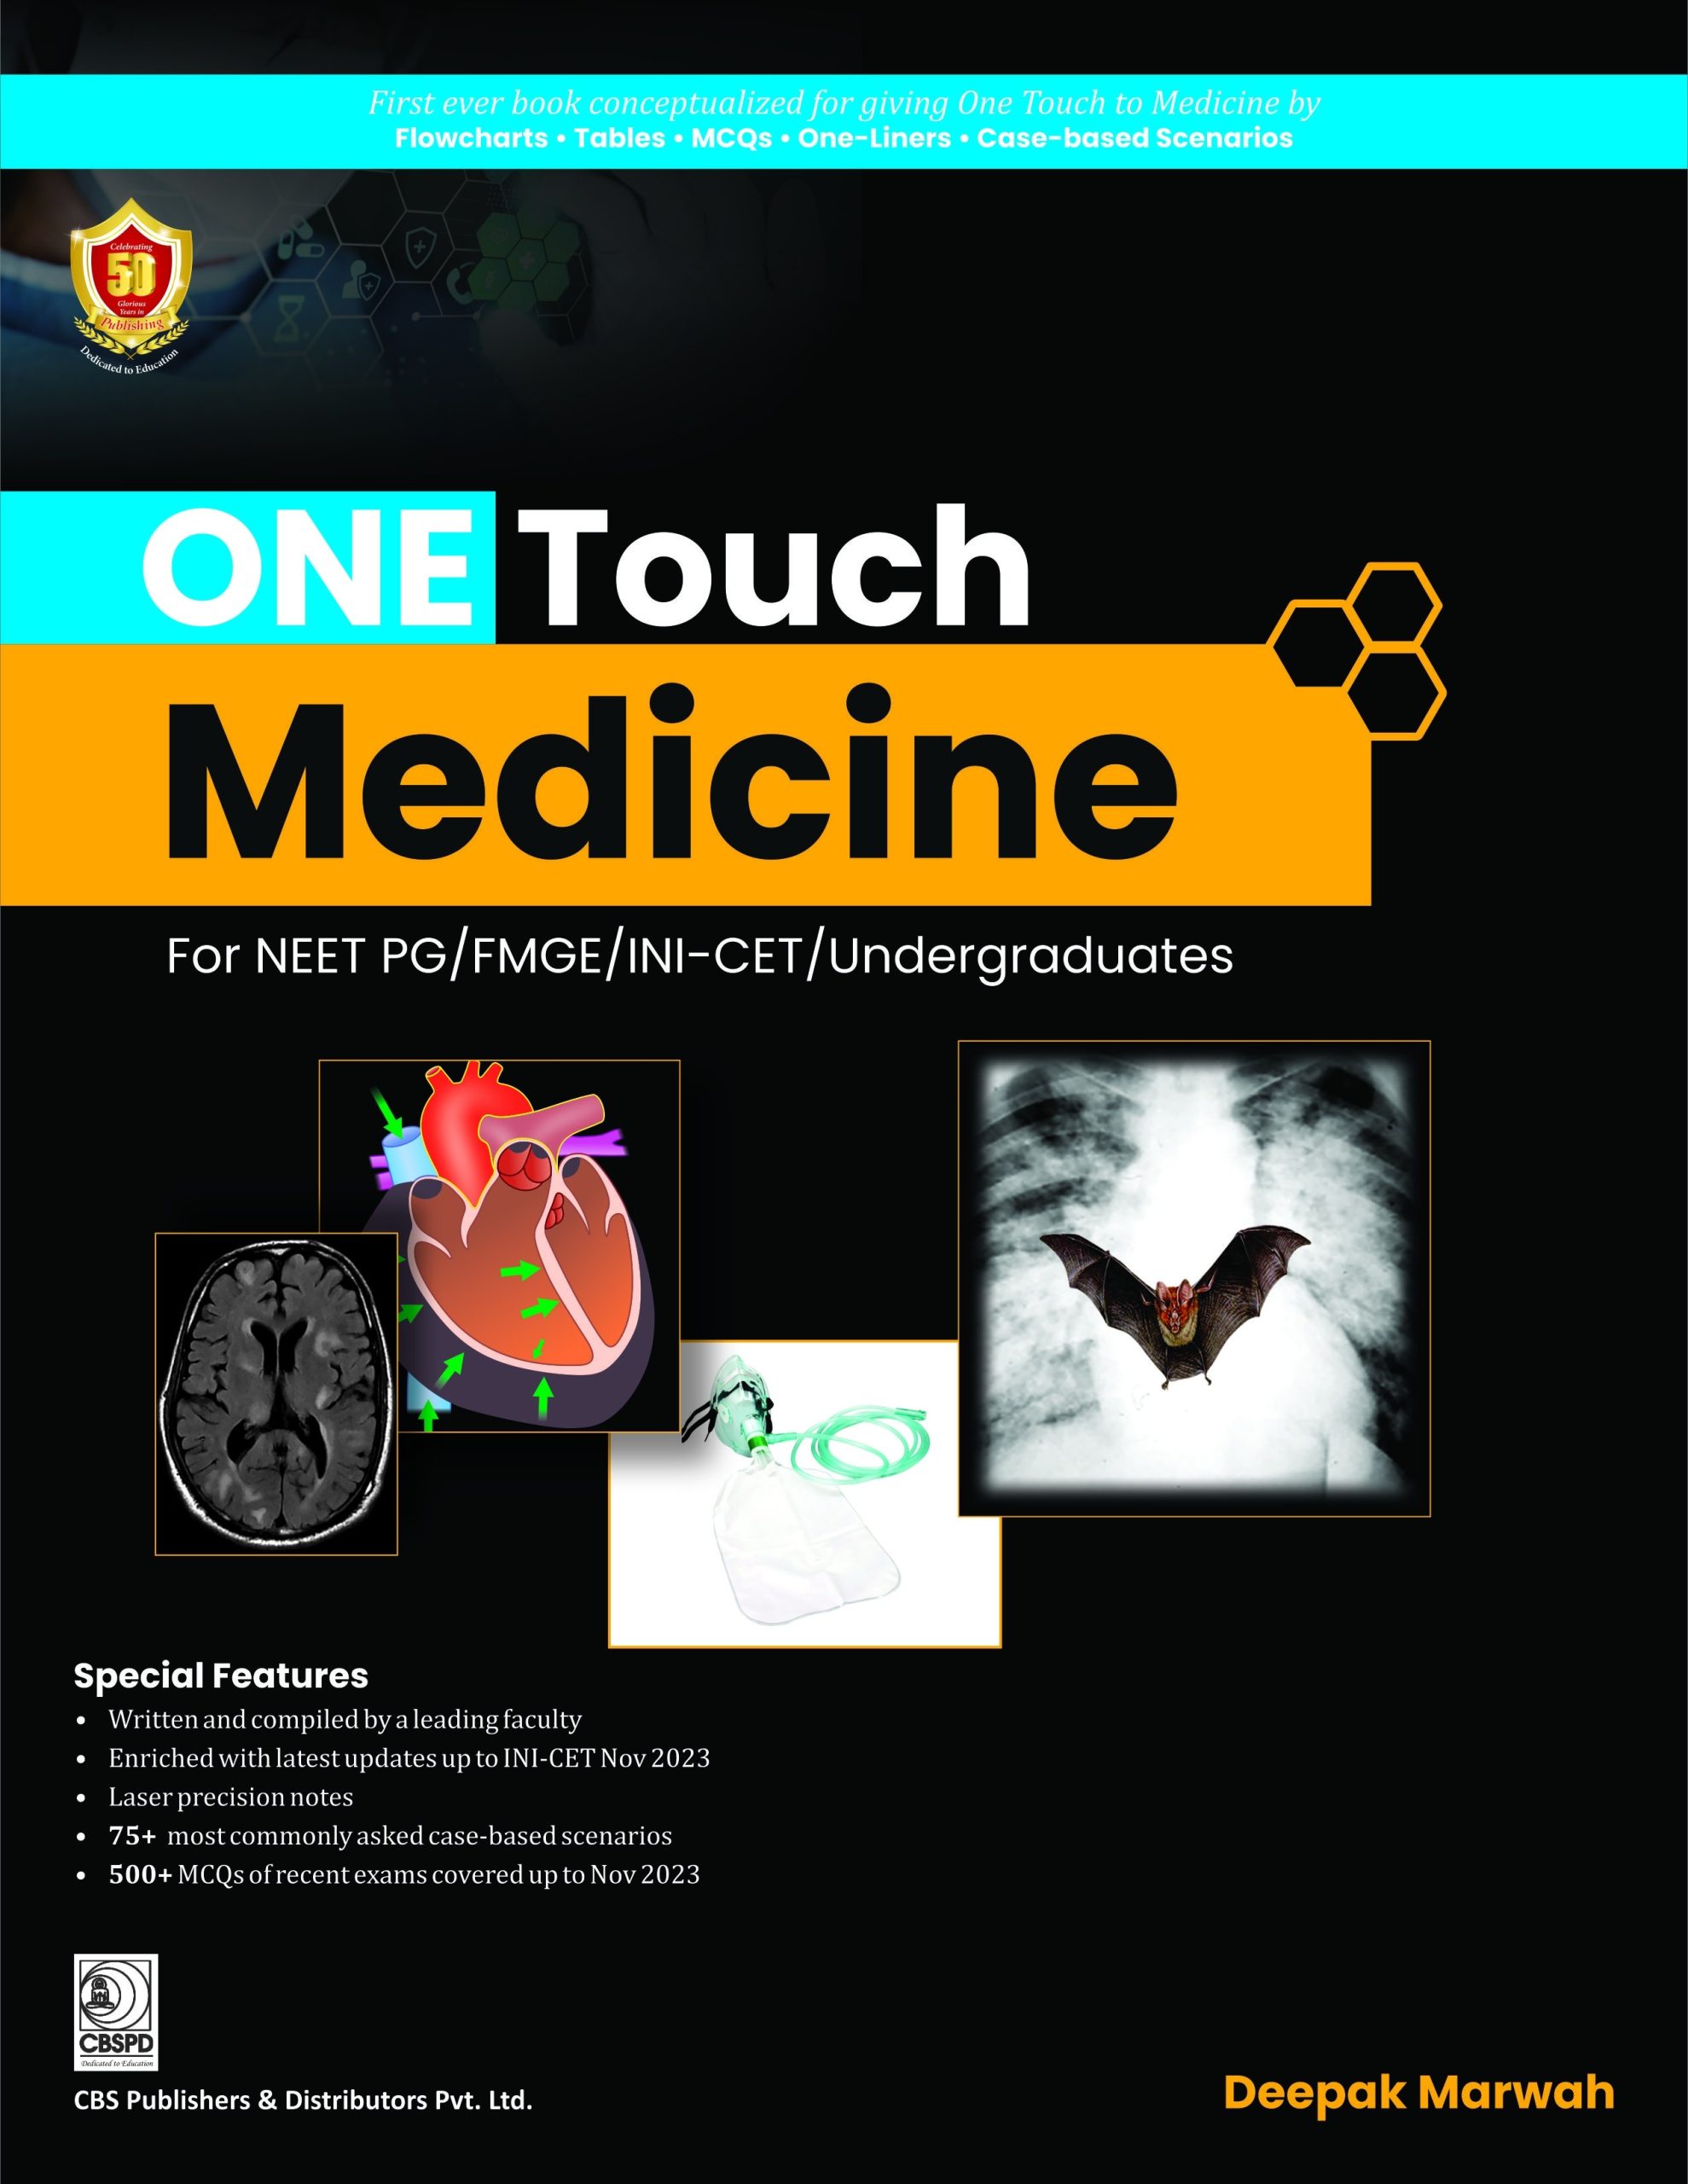 ONE TOUCH MEDICINE for NEET/NEXT/FMGE/INI-CET By Deepak Marwah